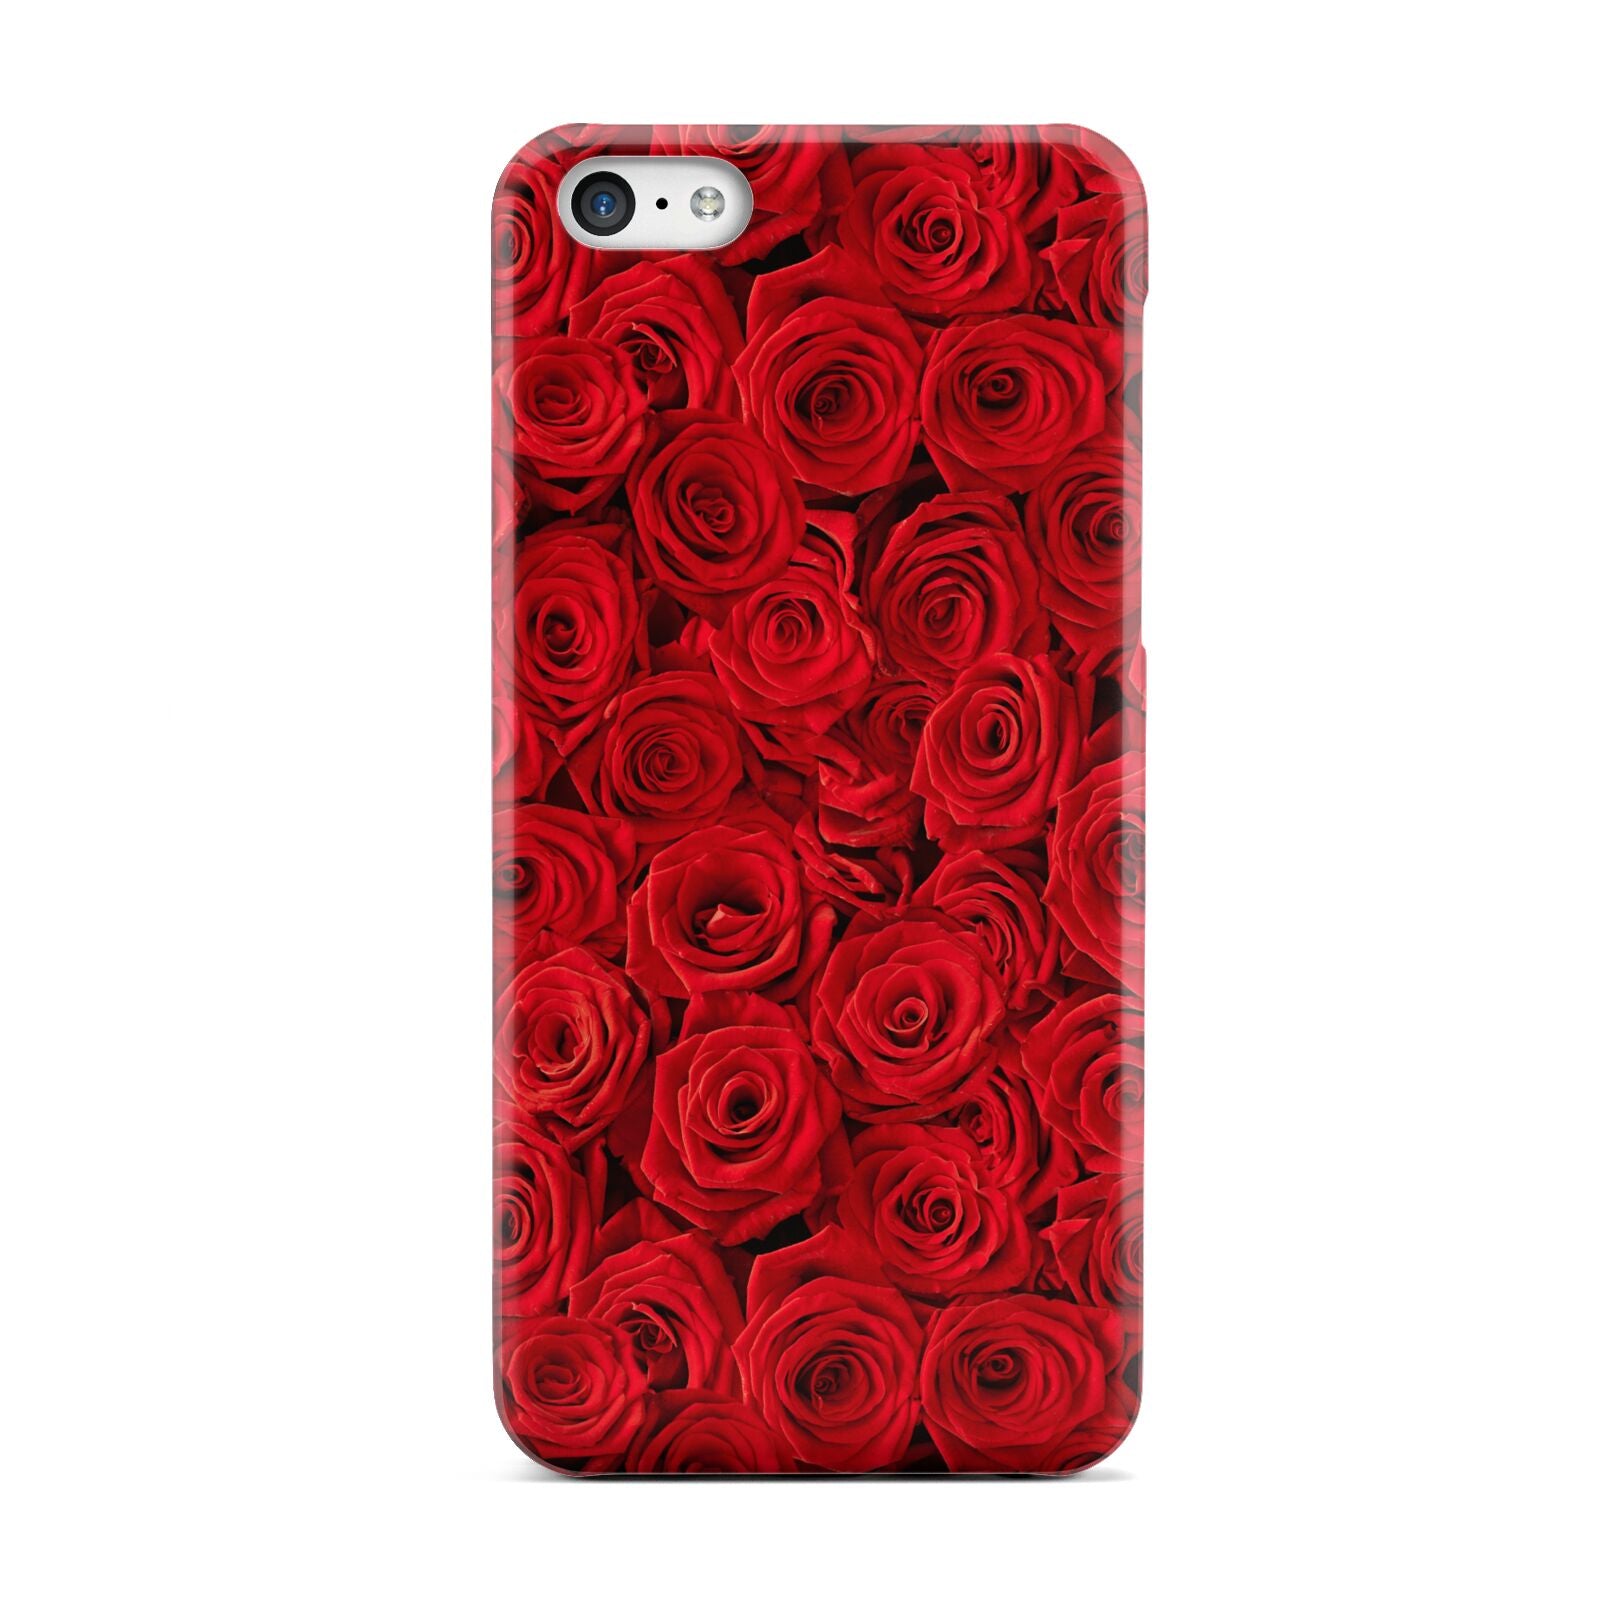 test THNG23 342 Apple iPhone 5c Case